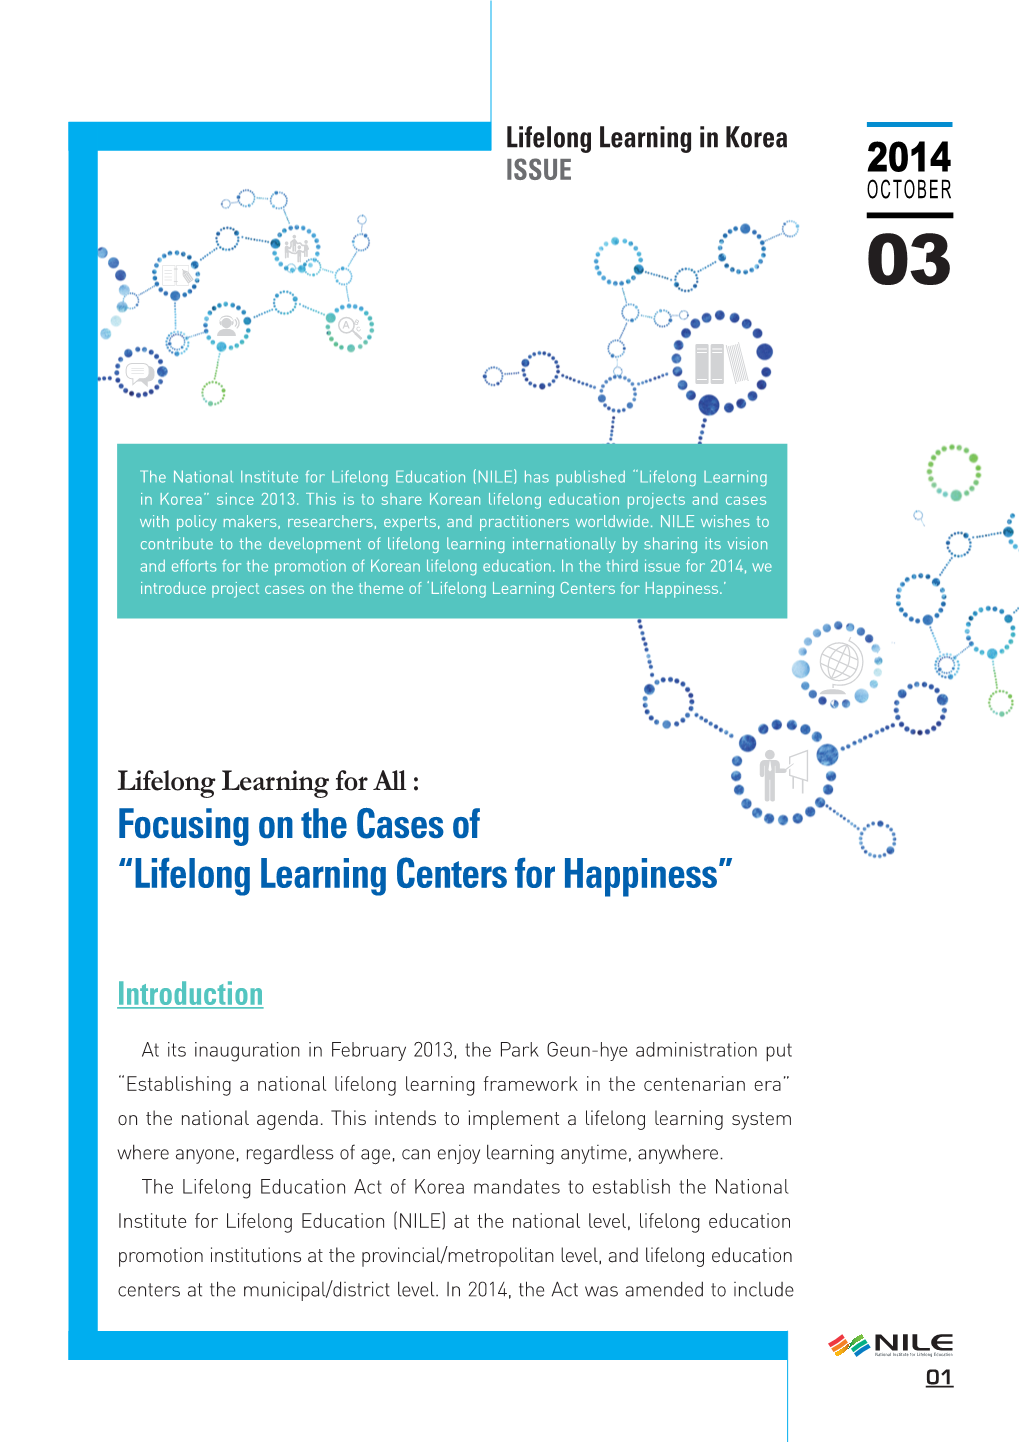 Lifelong Learning Centers for Happiness.’